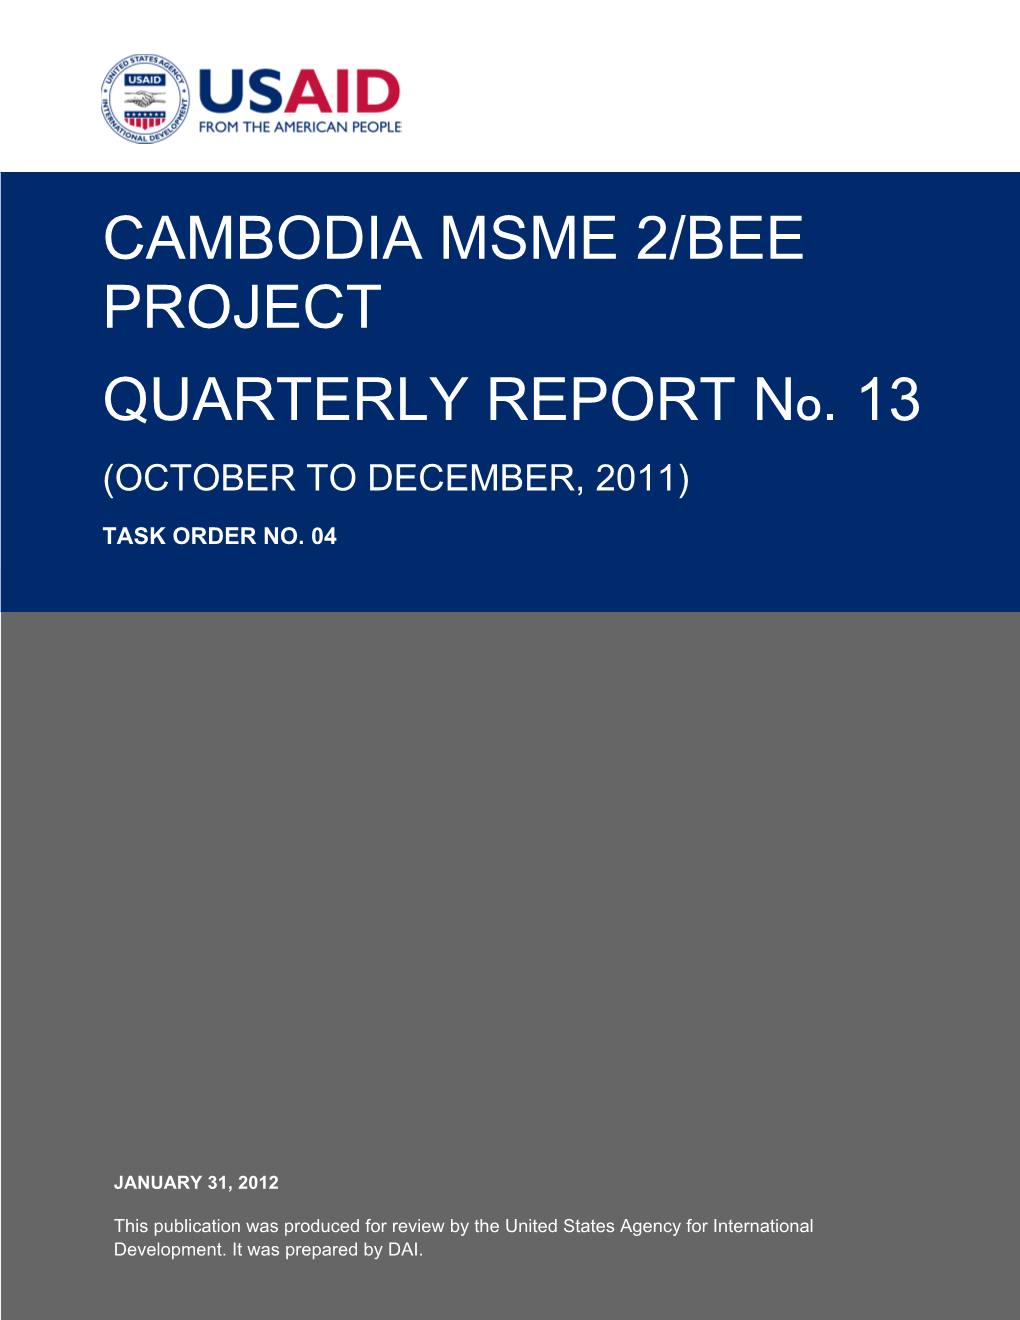 CAMBODIA MSME 2/BEE PROJECT QUARTERLY REPORT No. 13 YEAR 4 4